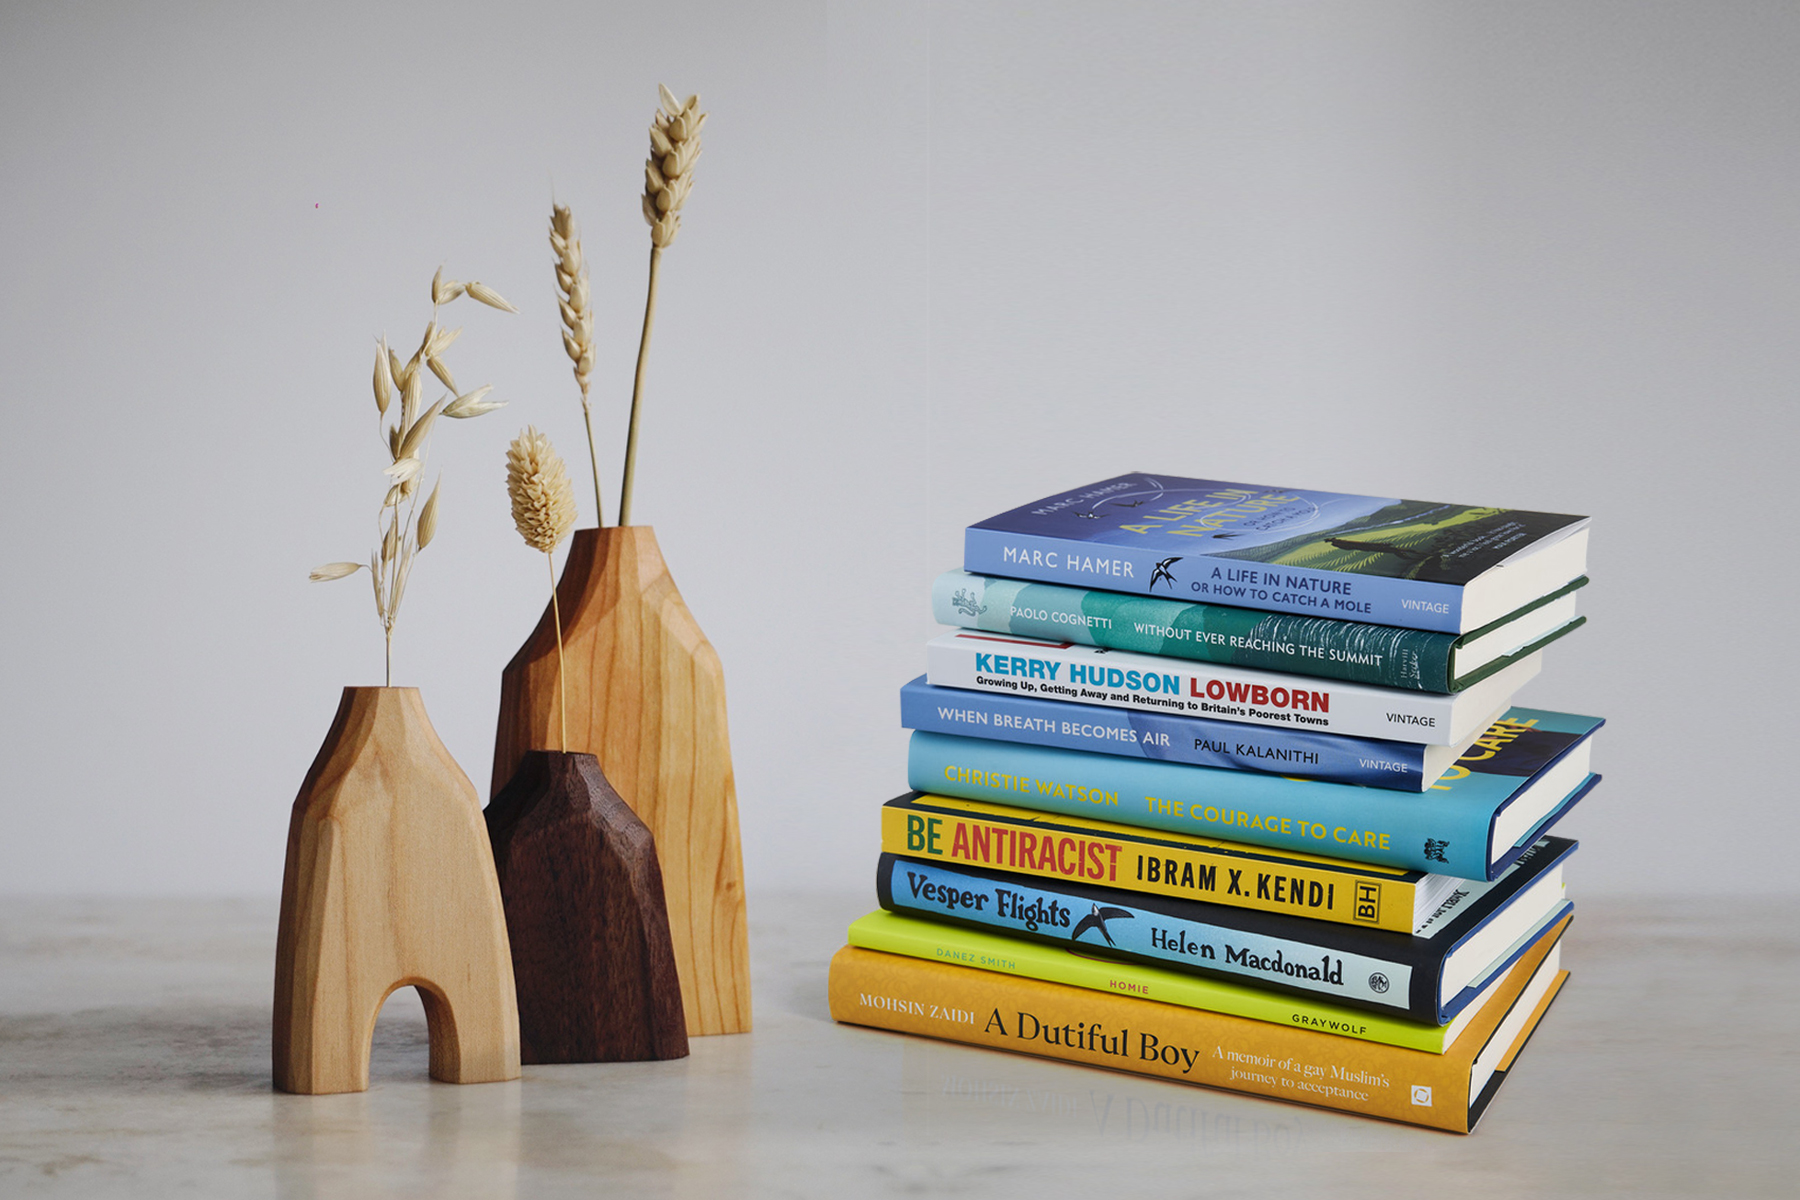 Lifestyle shot of Grain & Knot wooden vase trio next to a stack of blue and yellow Vintage books, against a grey marble background.